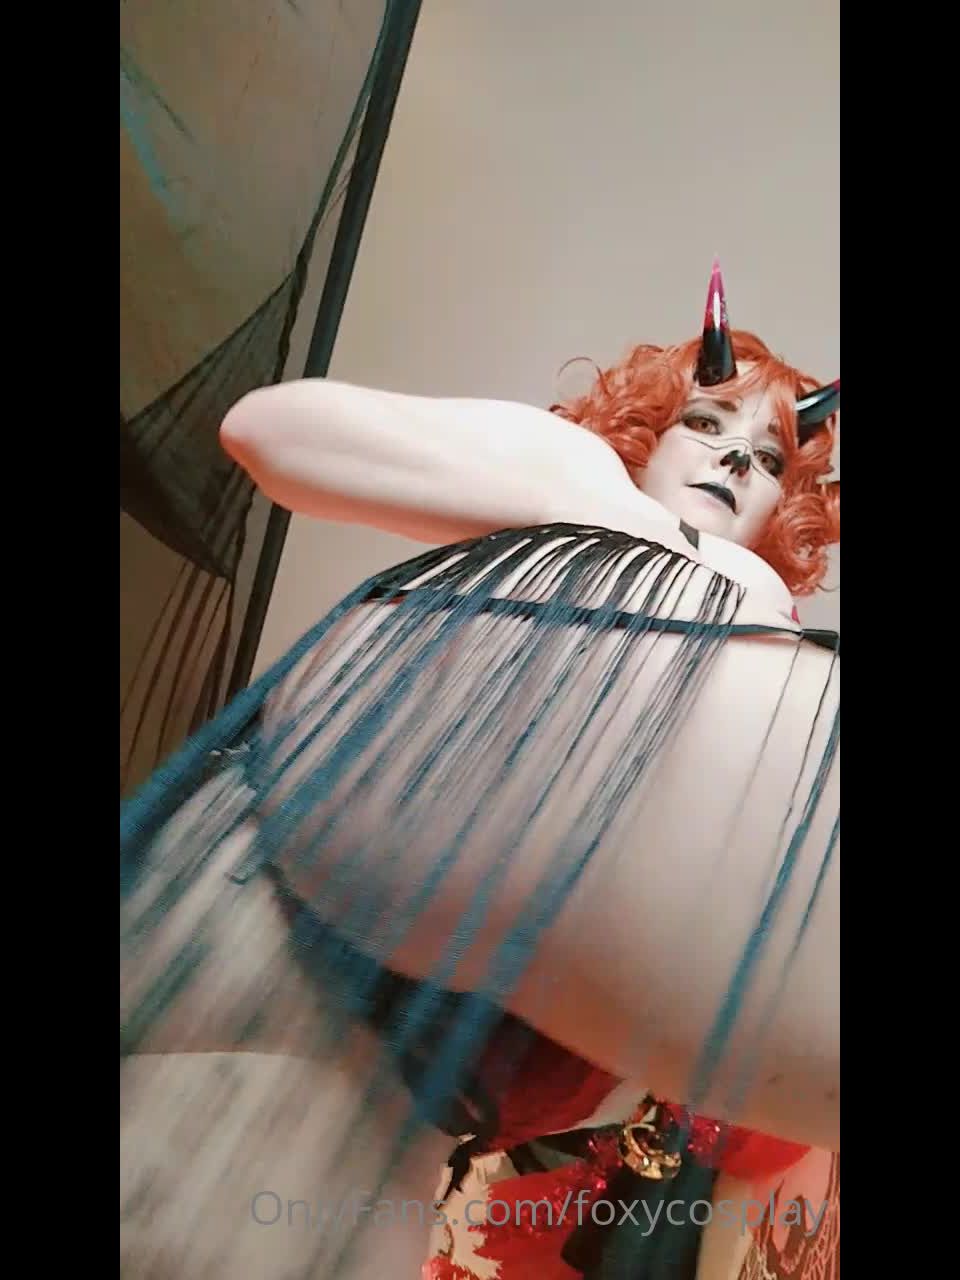 Foxycosplay () - booty tassels are the best i had fun shaking them in this video clip of krampus also 24-12-2020